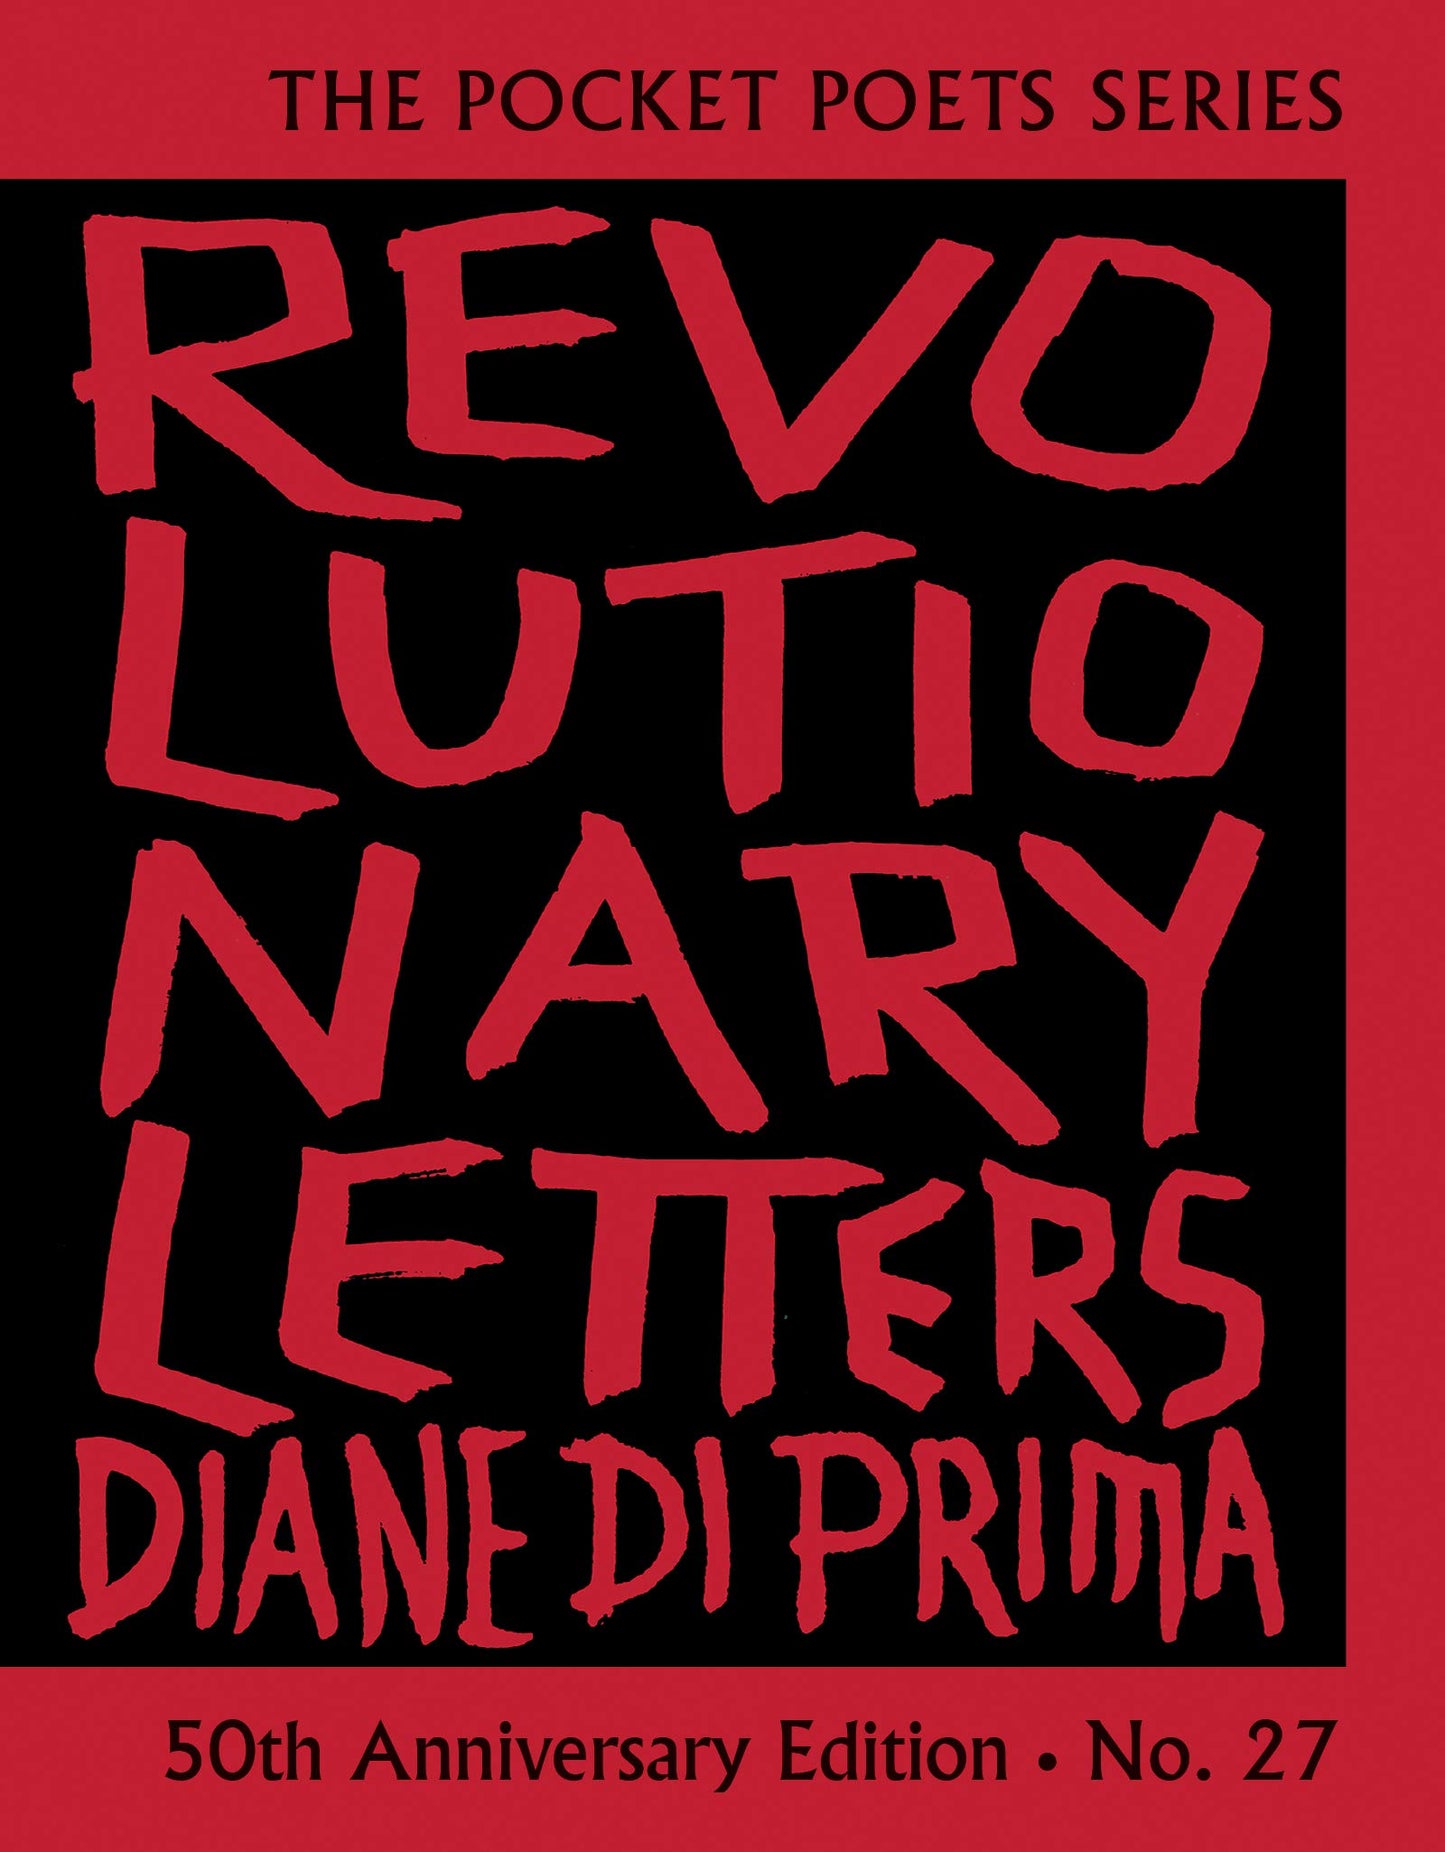 Revolutionary Letters: 50th Anniversary Edition, by Diane DiPrima